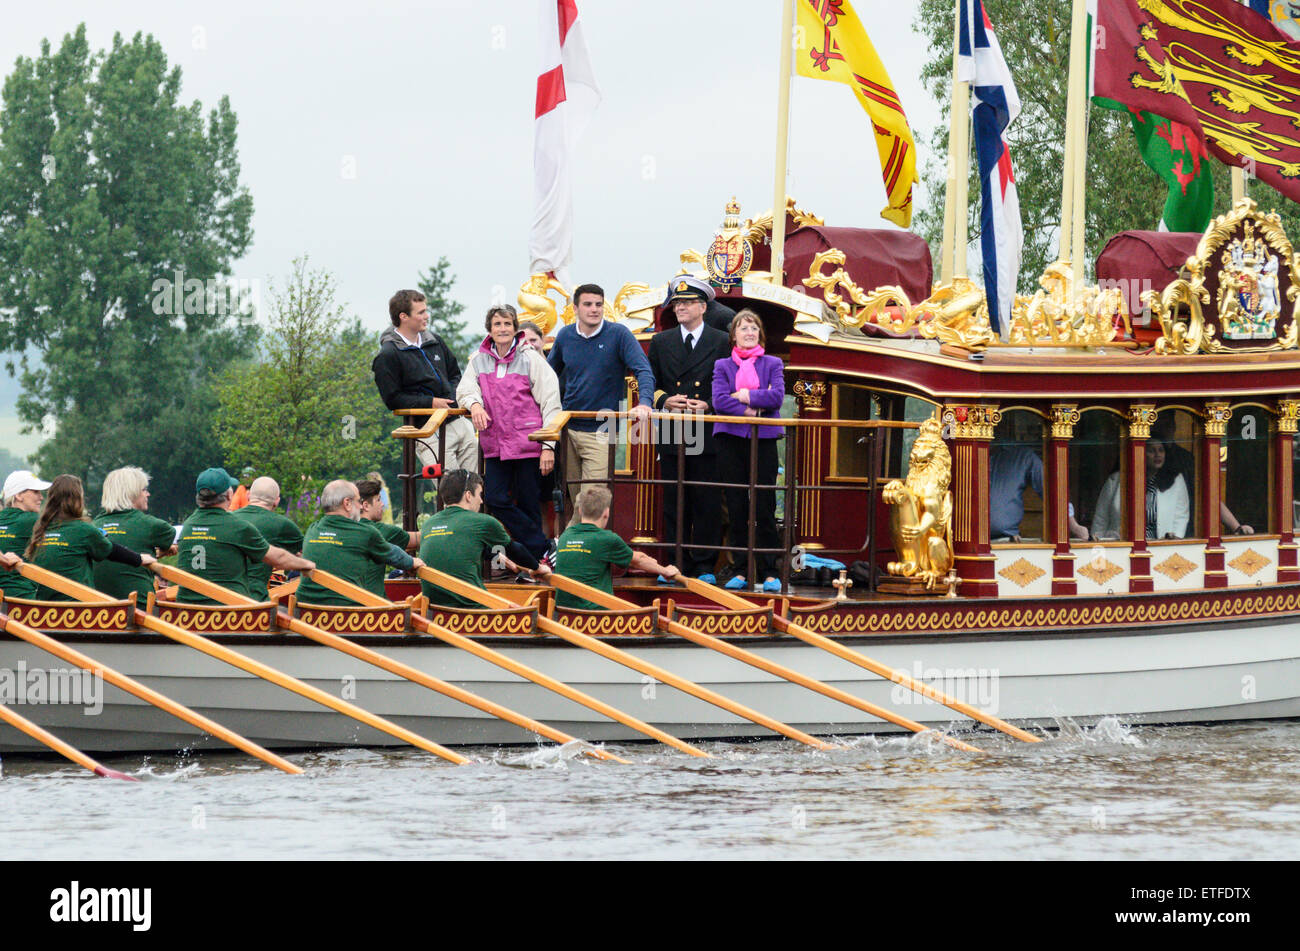 Cookham, Berkshire, UK. 13th June, 2015. The Queen's Row Barge Gloriana sails down the Thames towards Cookham, Berkshire, England, UK on 13 June 2015. Gloriana is taking part in a two day Flotilla from Hurley to Runnymede to commemorate the 800th anniversary of the sealing of the Magna Carta. Credit:  Michael Winters/Alamy Live News Stock Photo